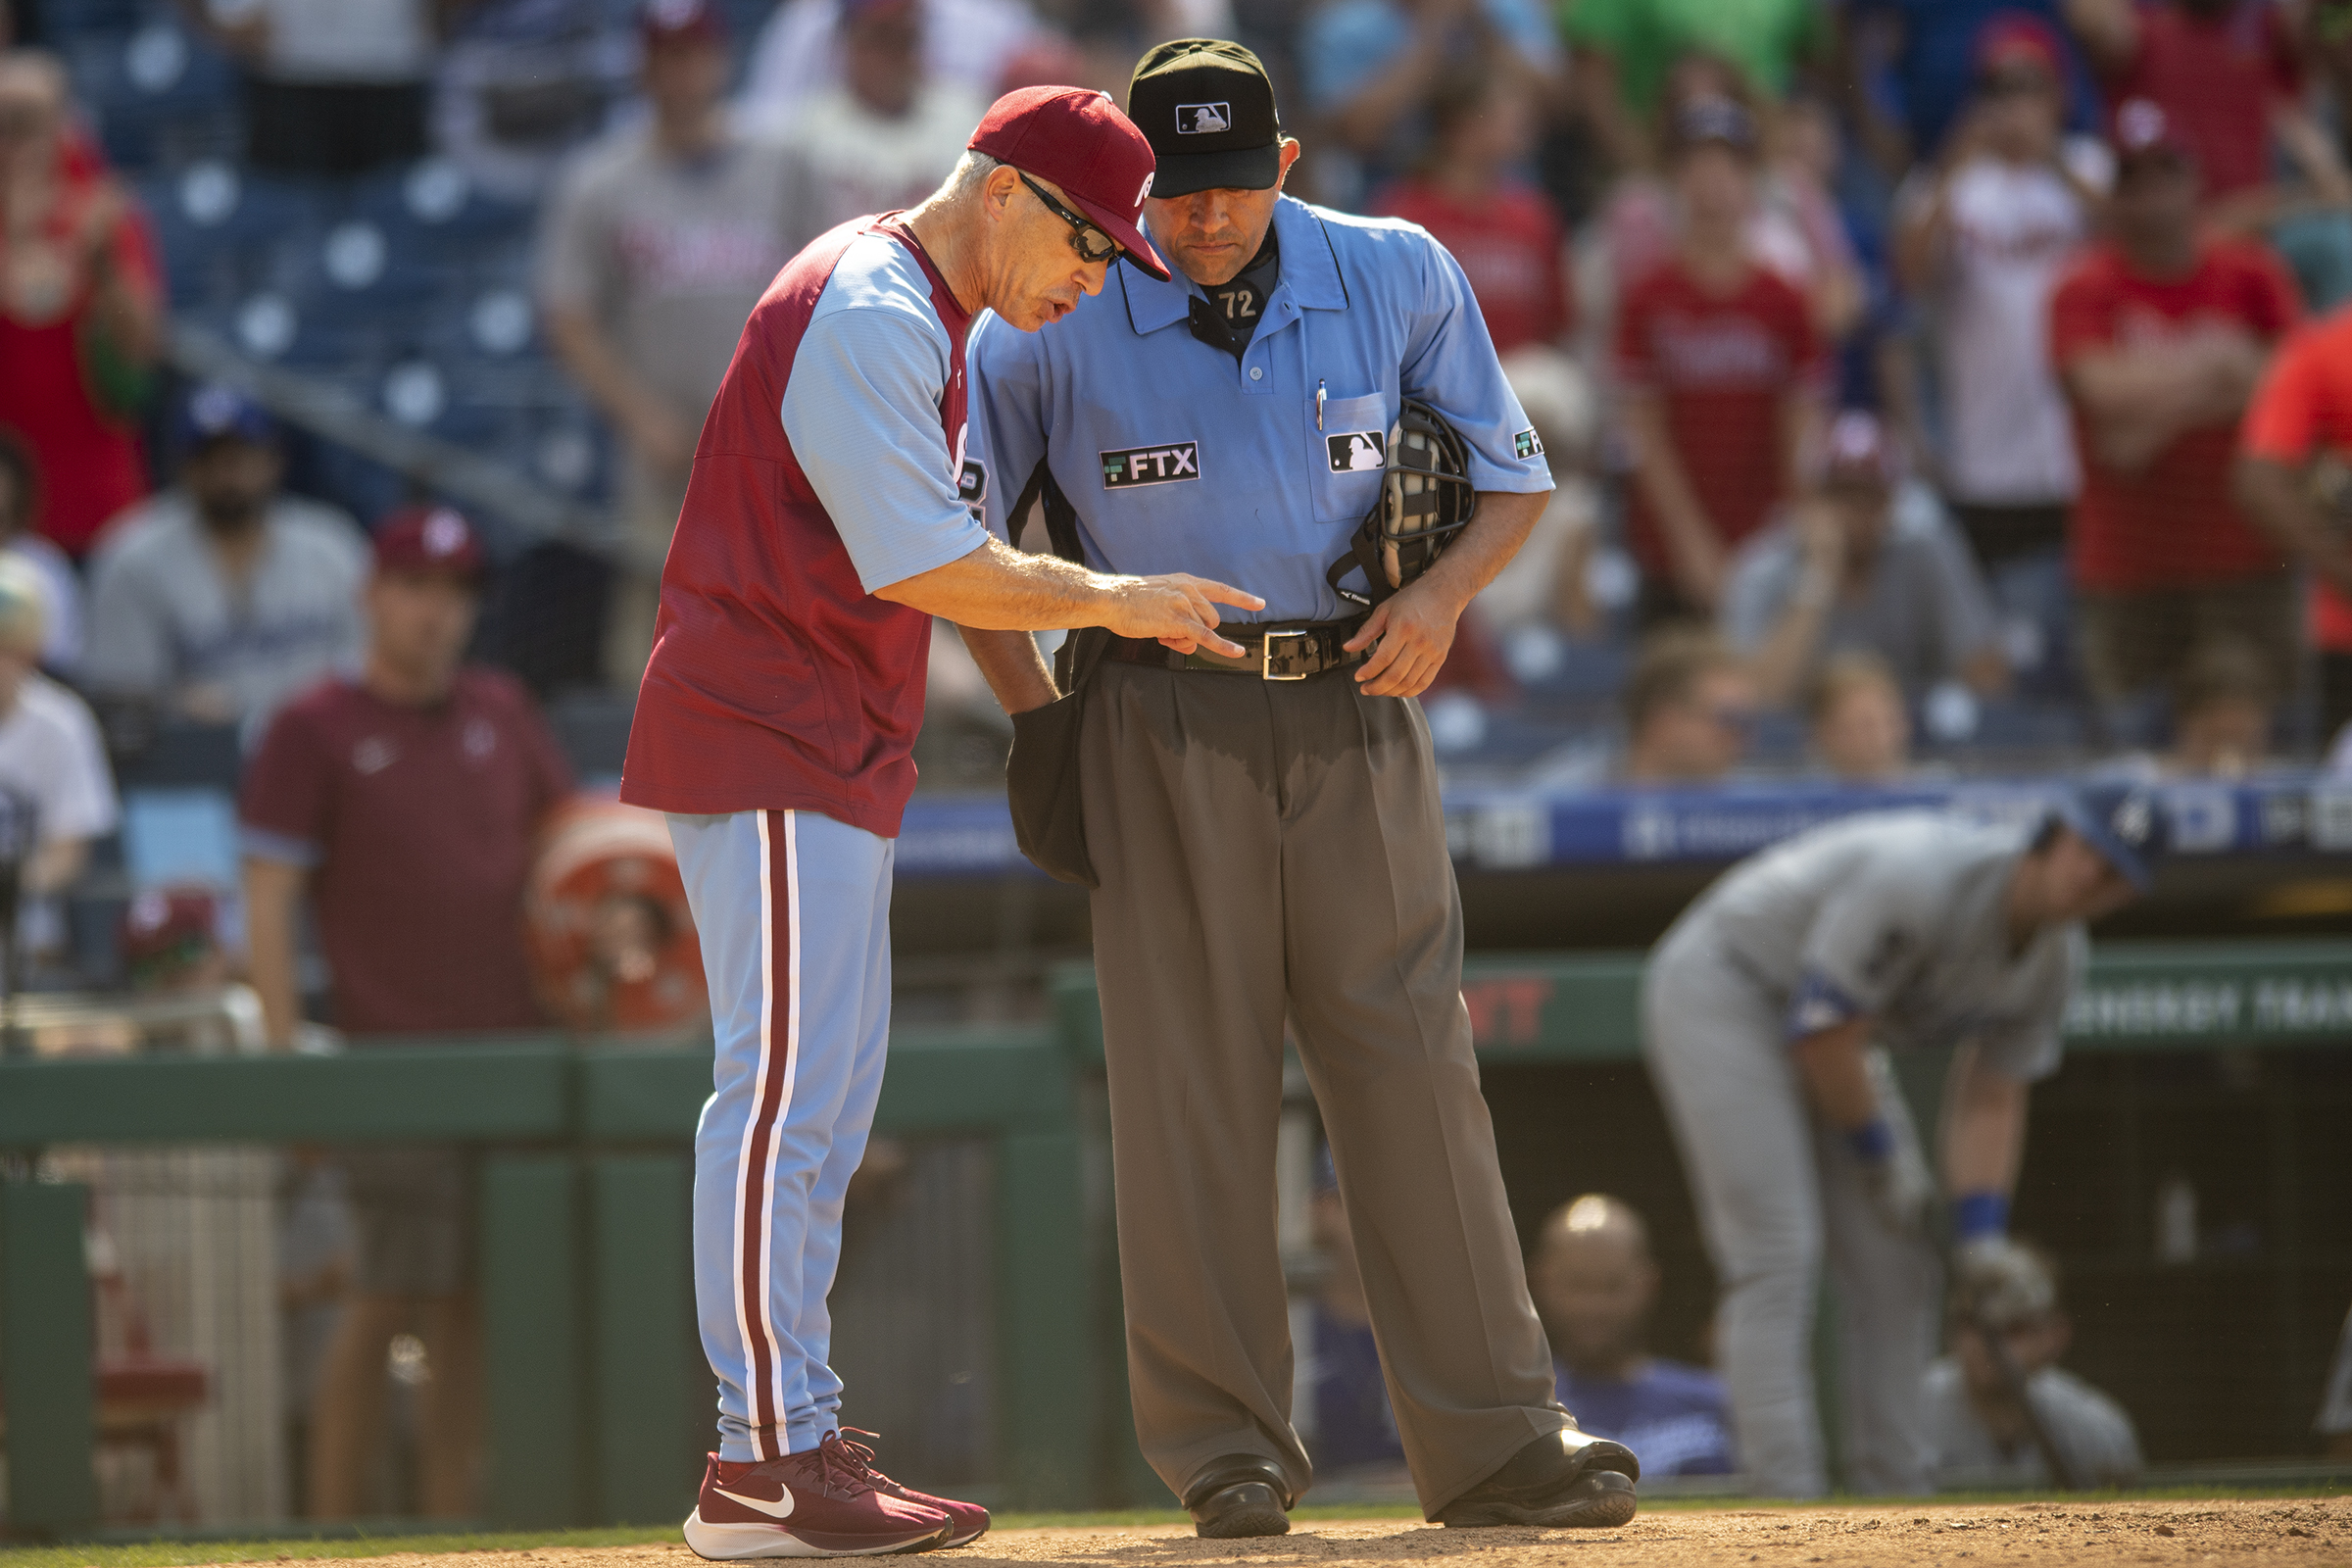 meaning of ftx on umpire shirt